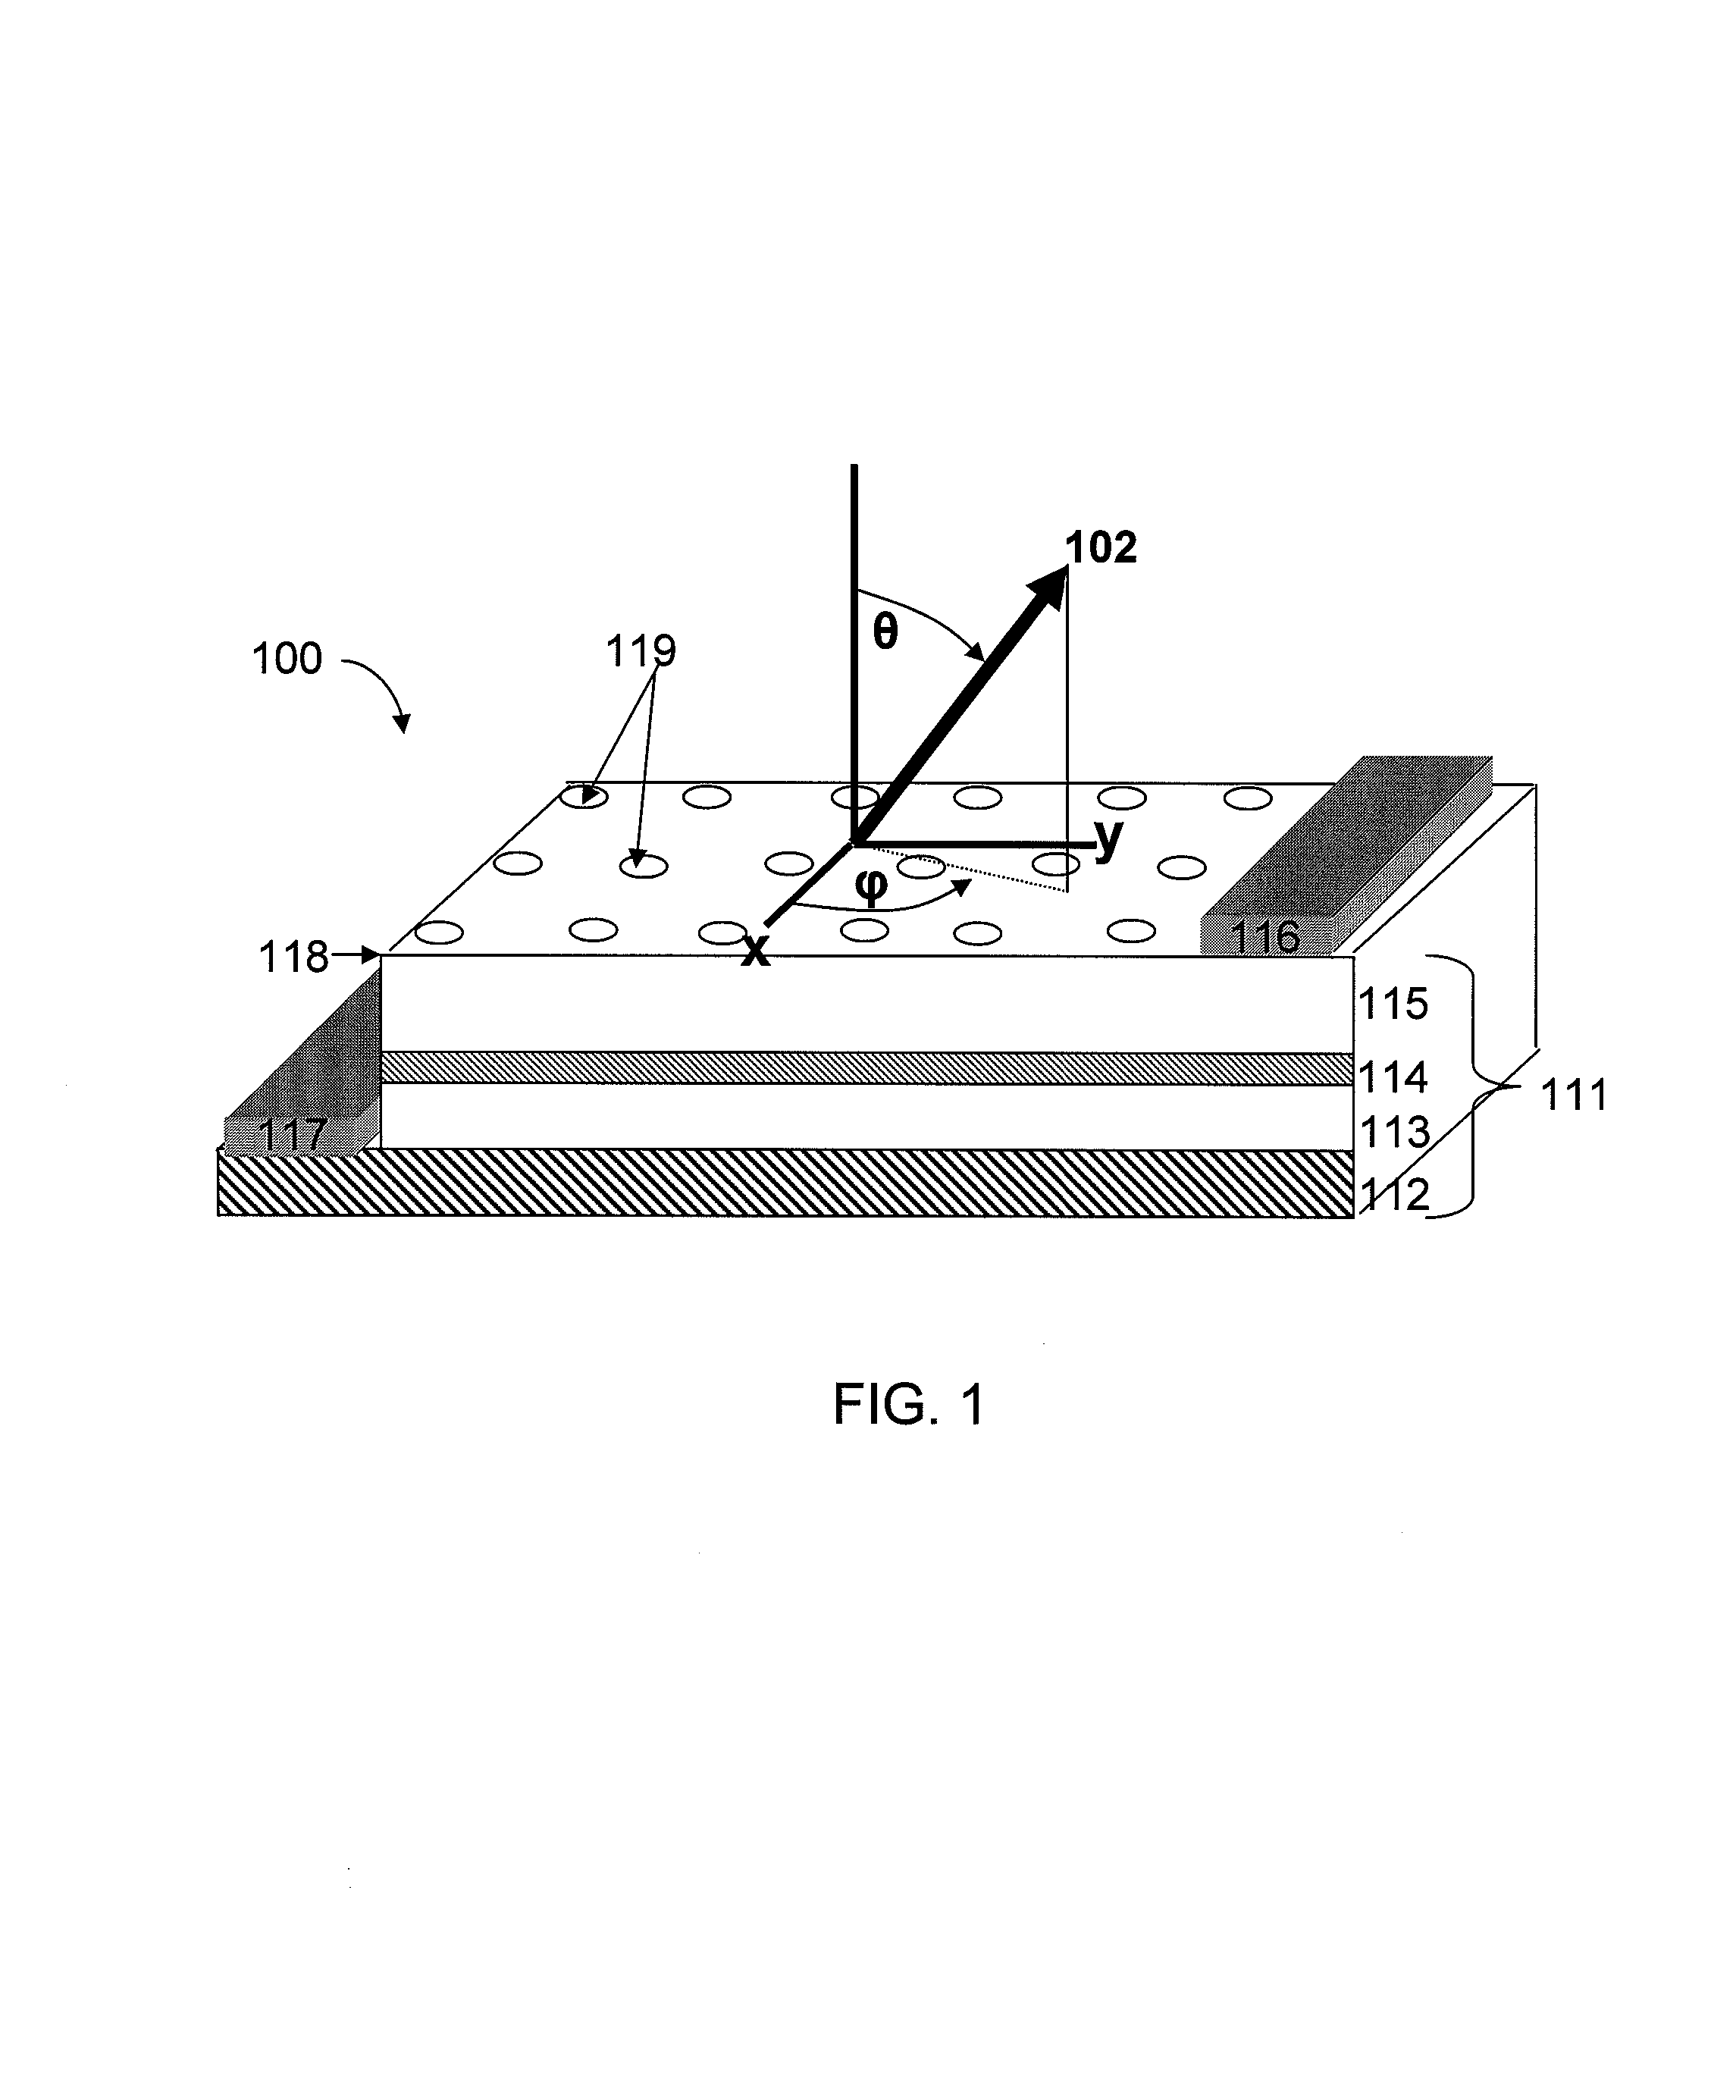 Anisotropic collimation devices and related methods